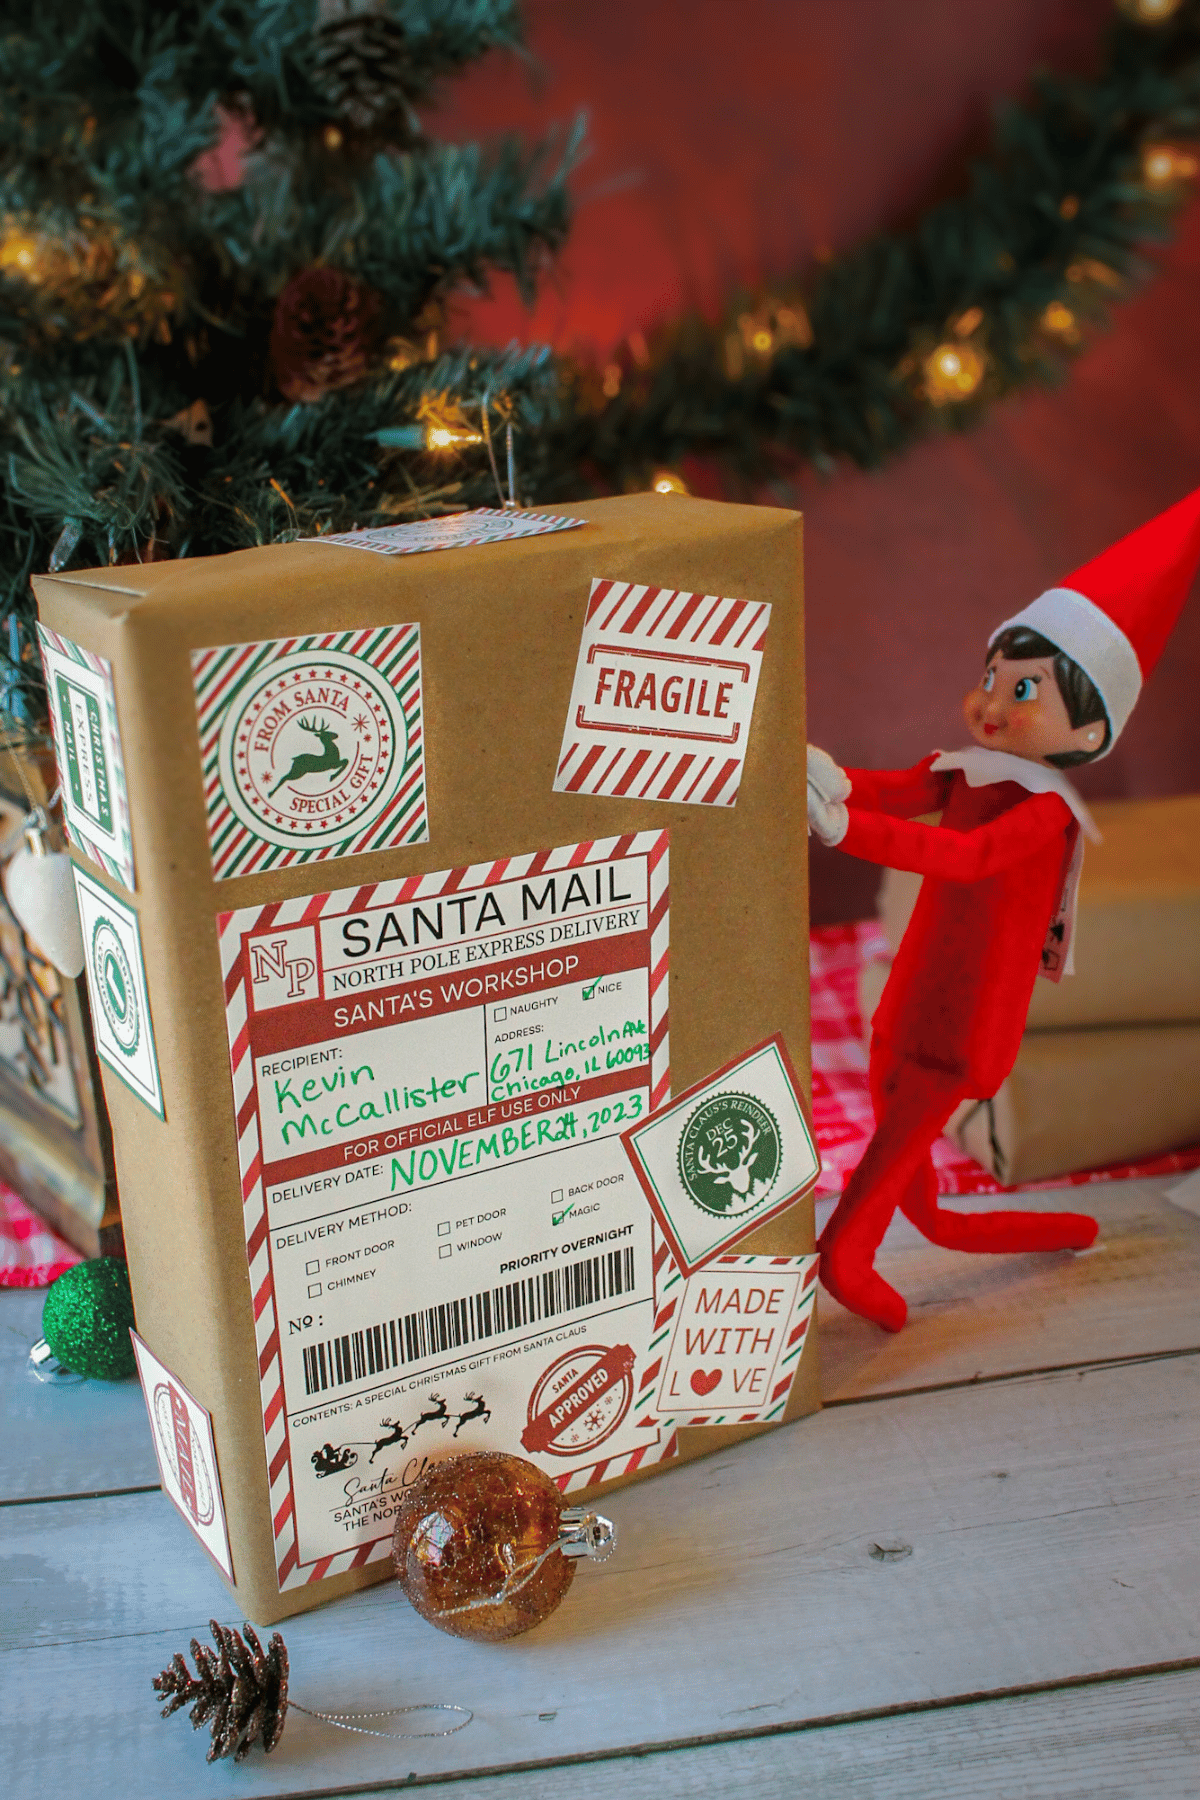 Elf on the Shelf pushing box into the house